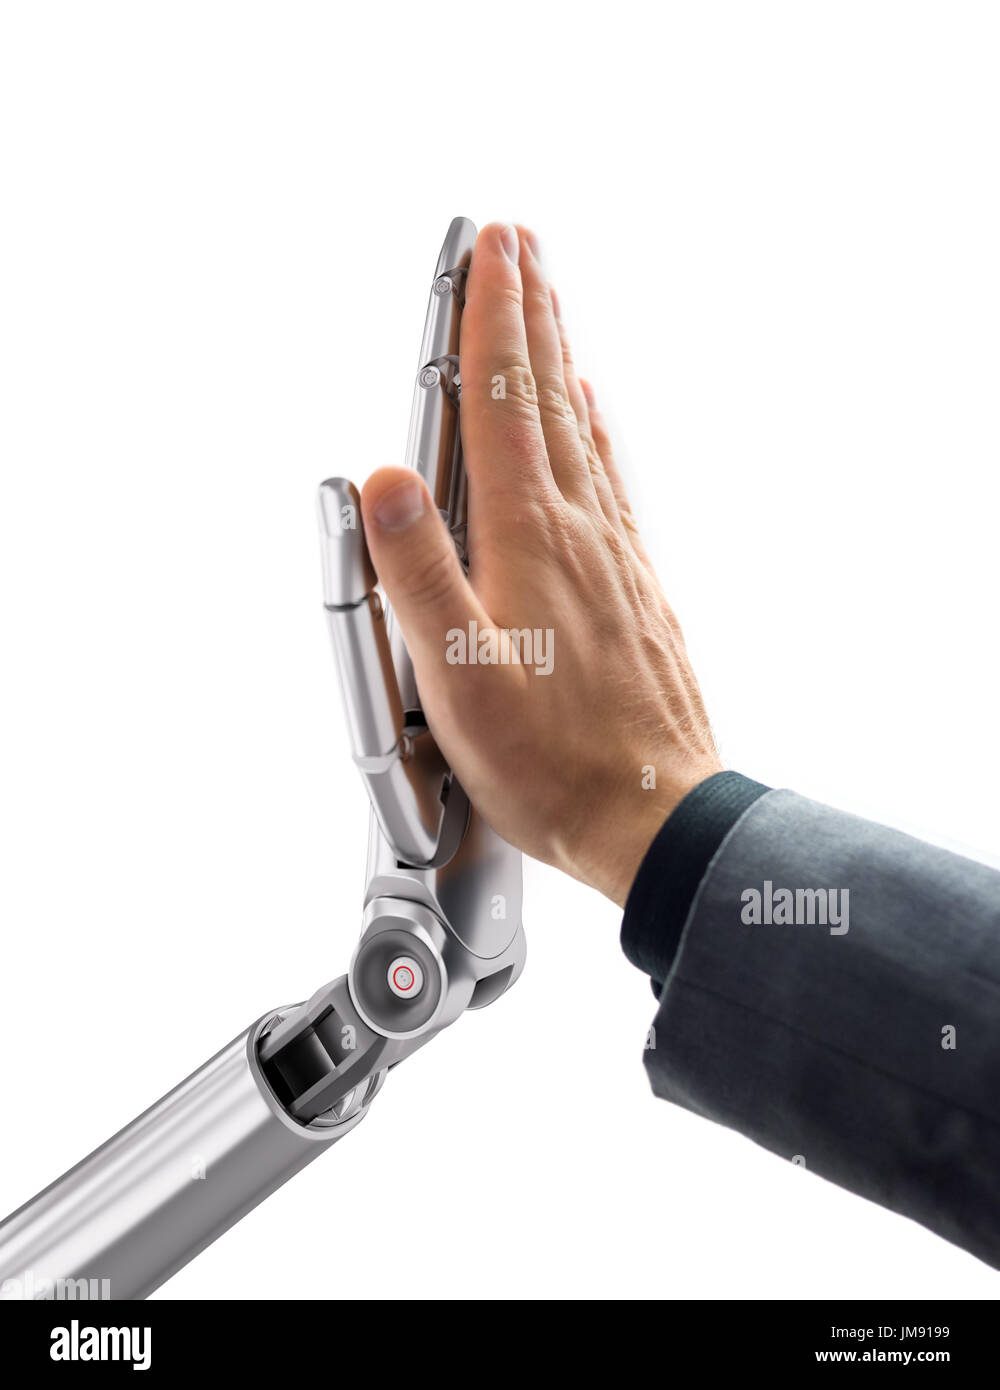 Robot and Human Giving a High Five. Artificial Intelligence Technology Concept 3d Illustration Stock Photo